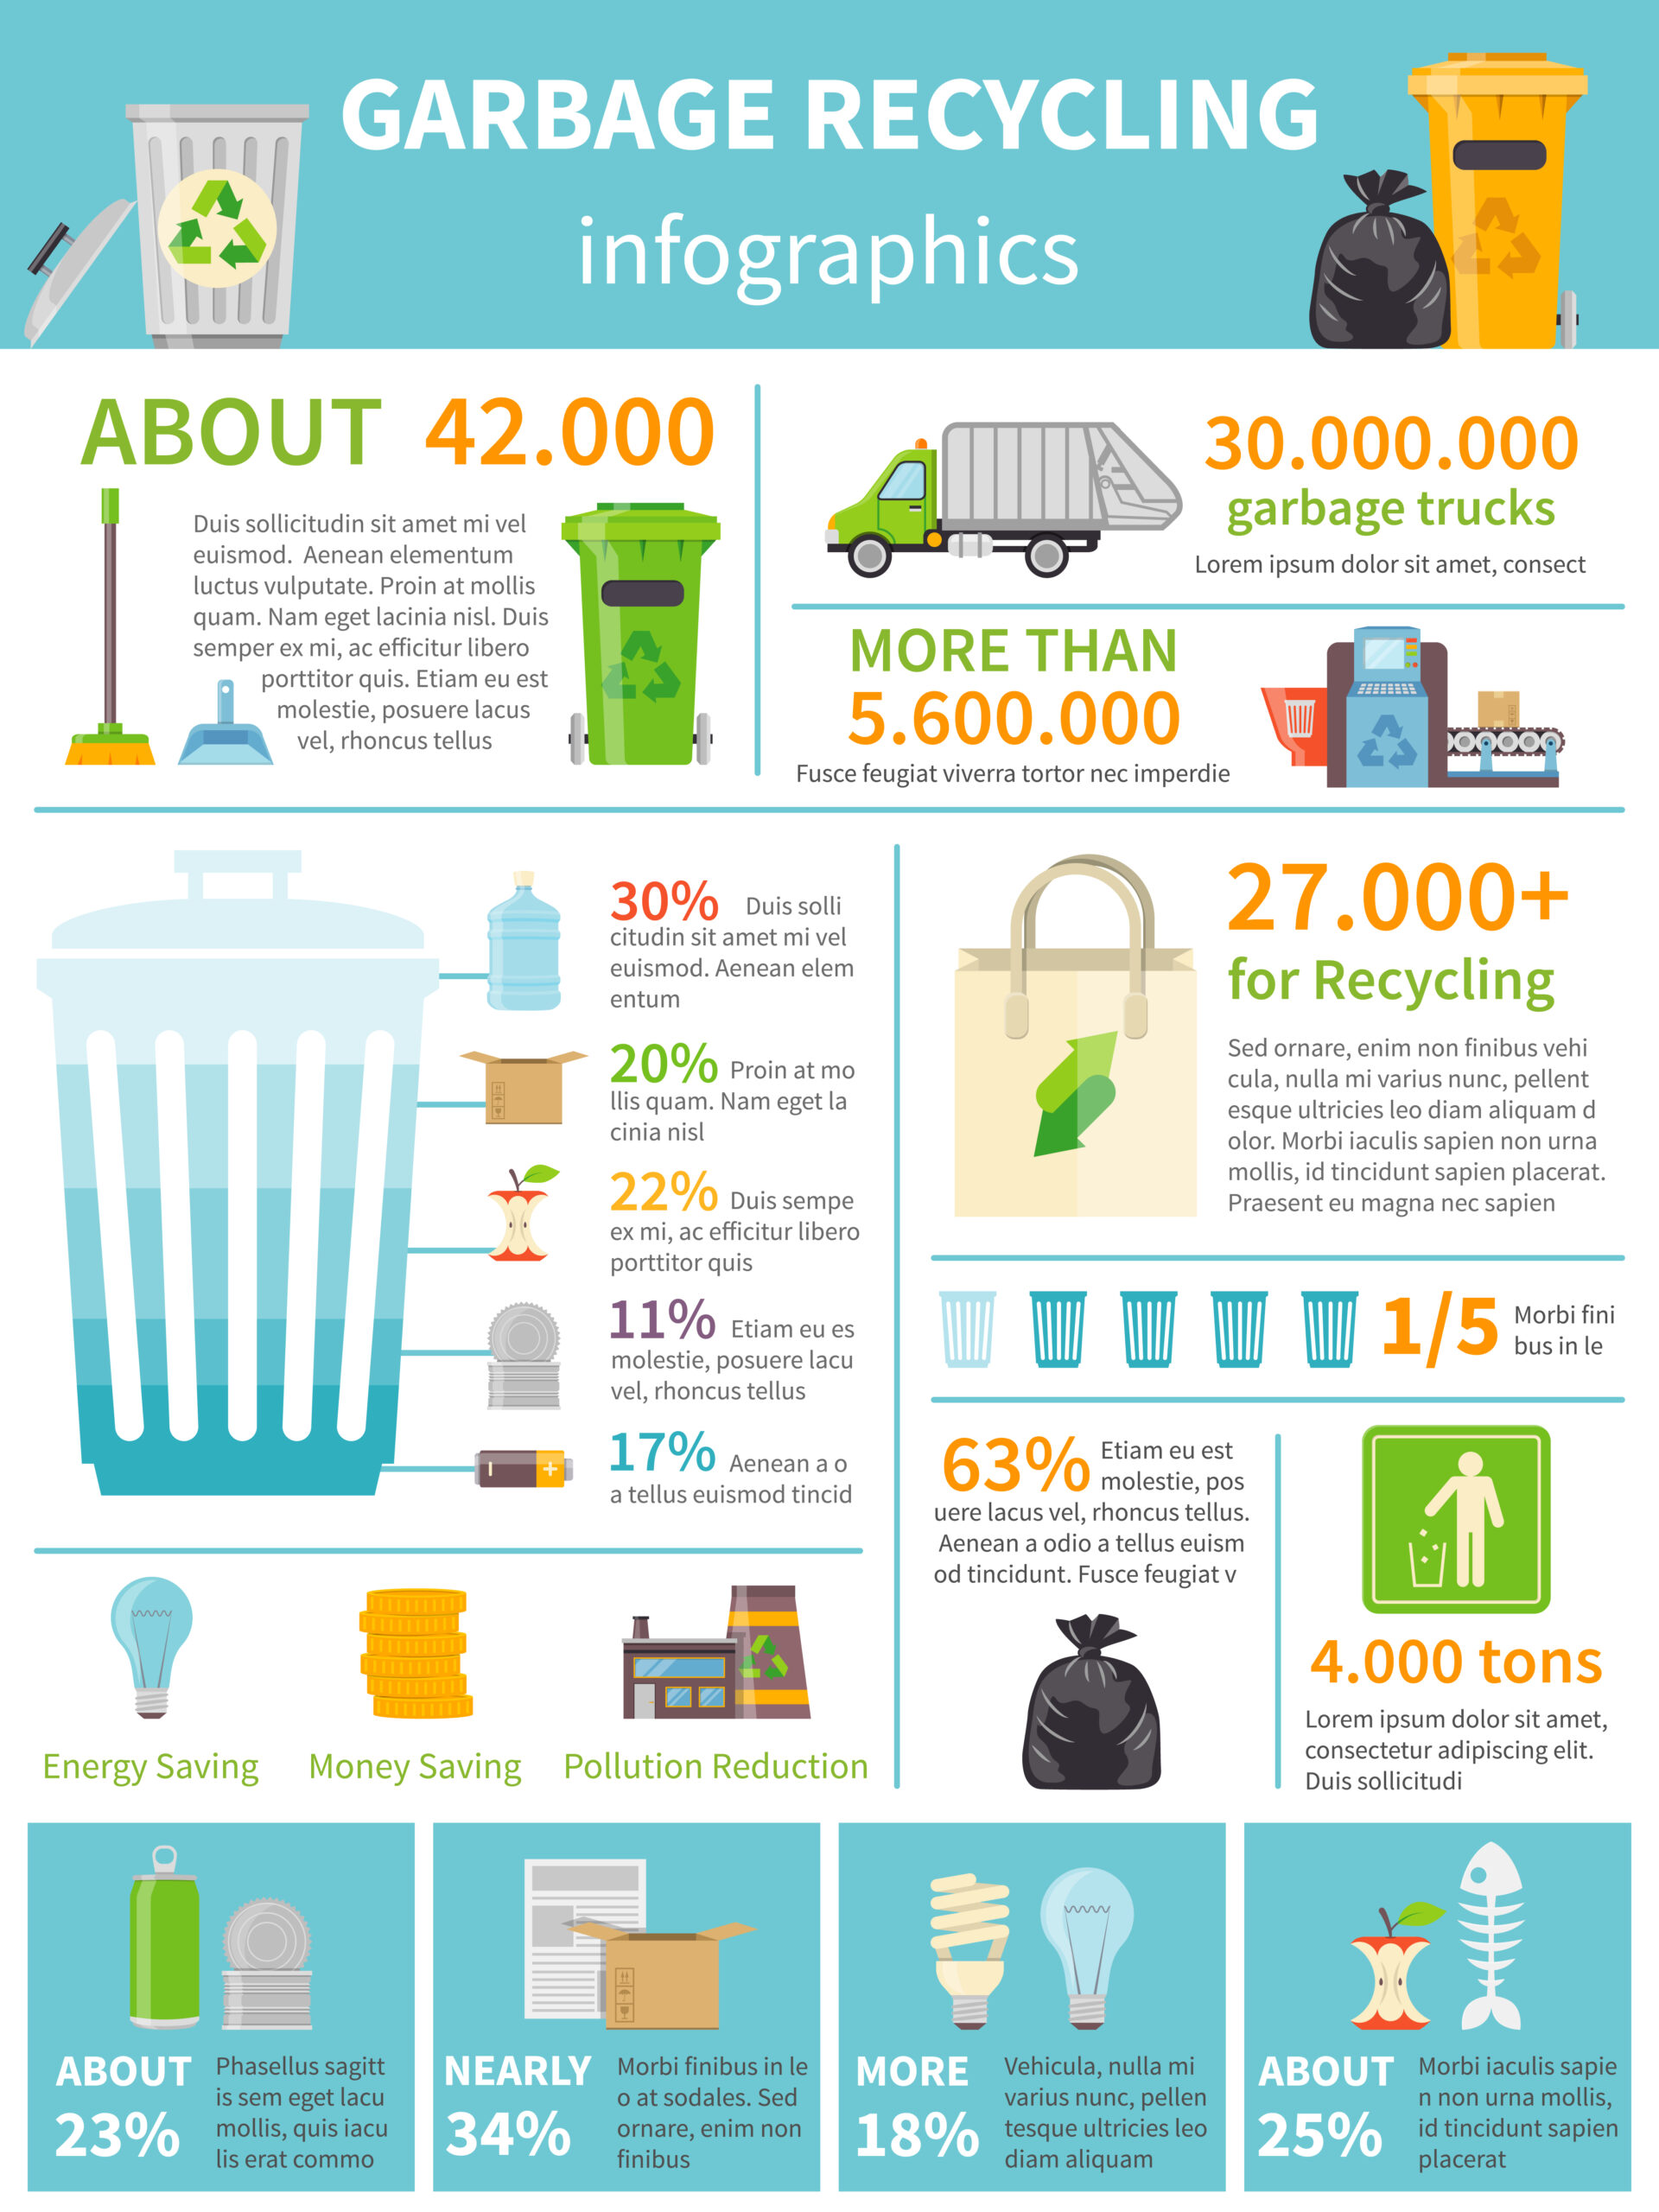 Garbage Recycling Infographic Set - Download Free Vectors, Clipart Graphics & Vector Art